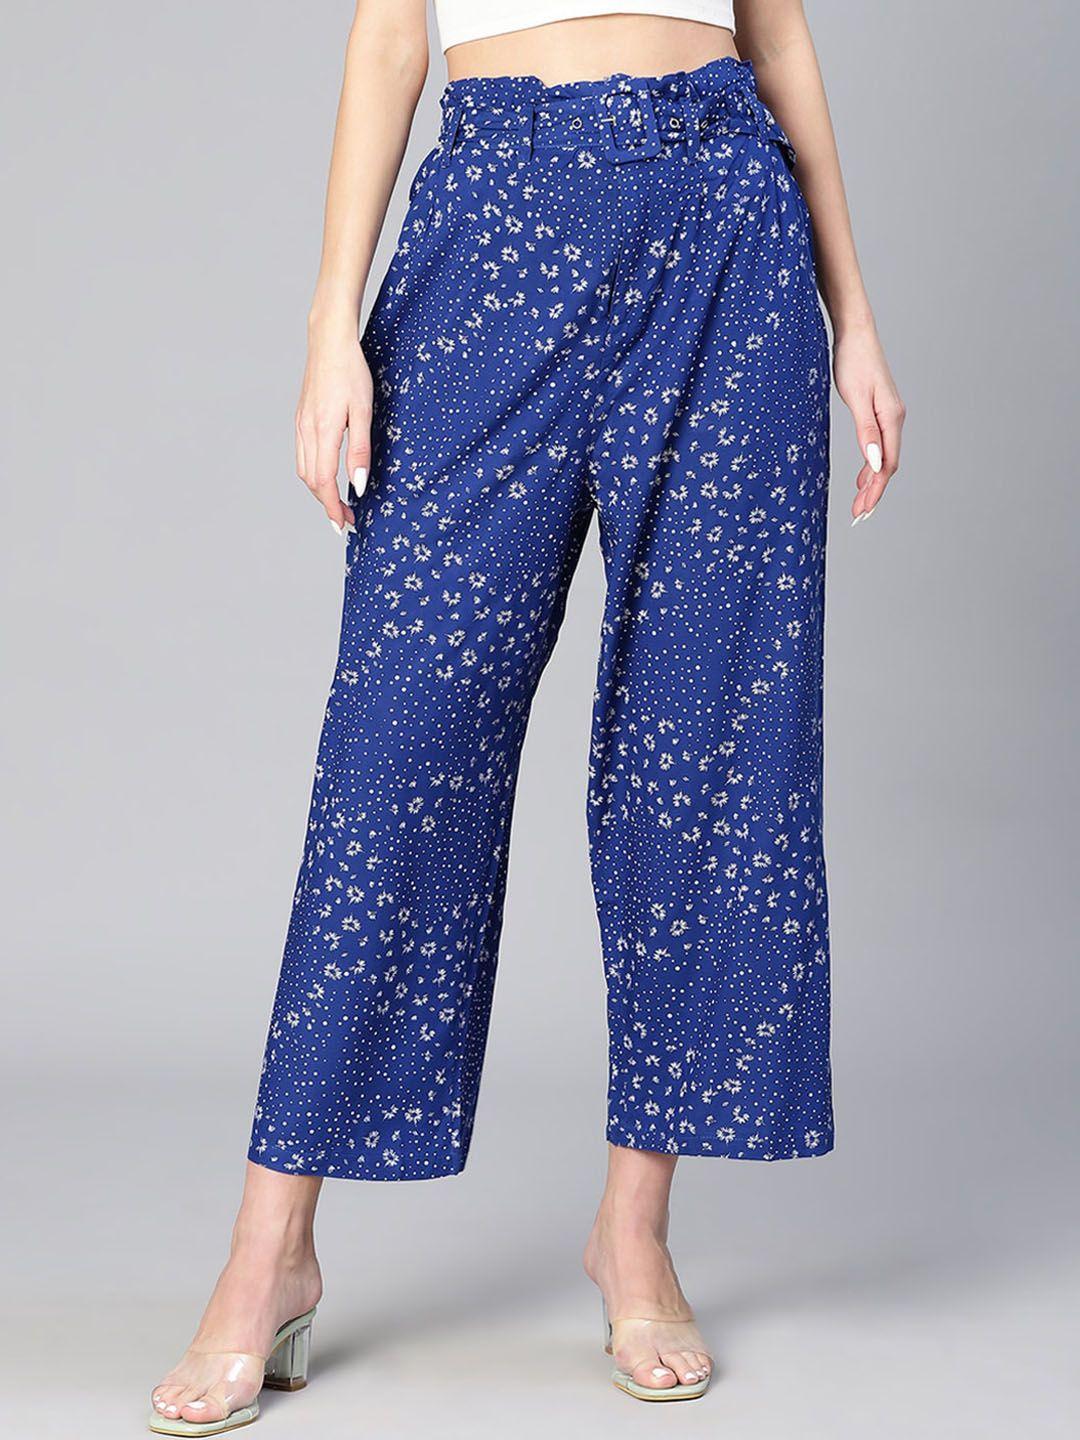 oxolloxo women abstract printed relaxed fit wrinkle free trousers